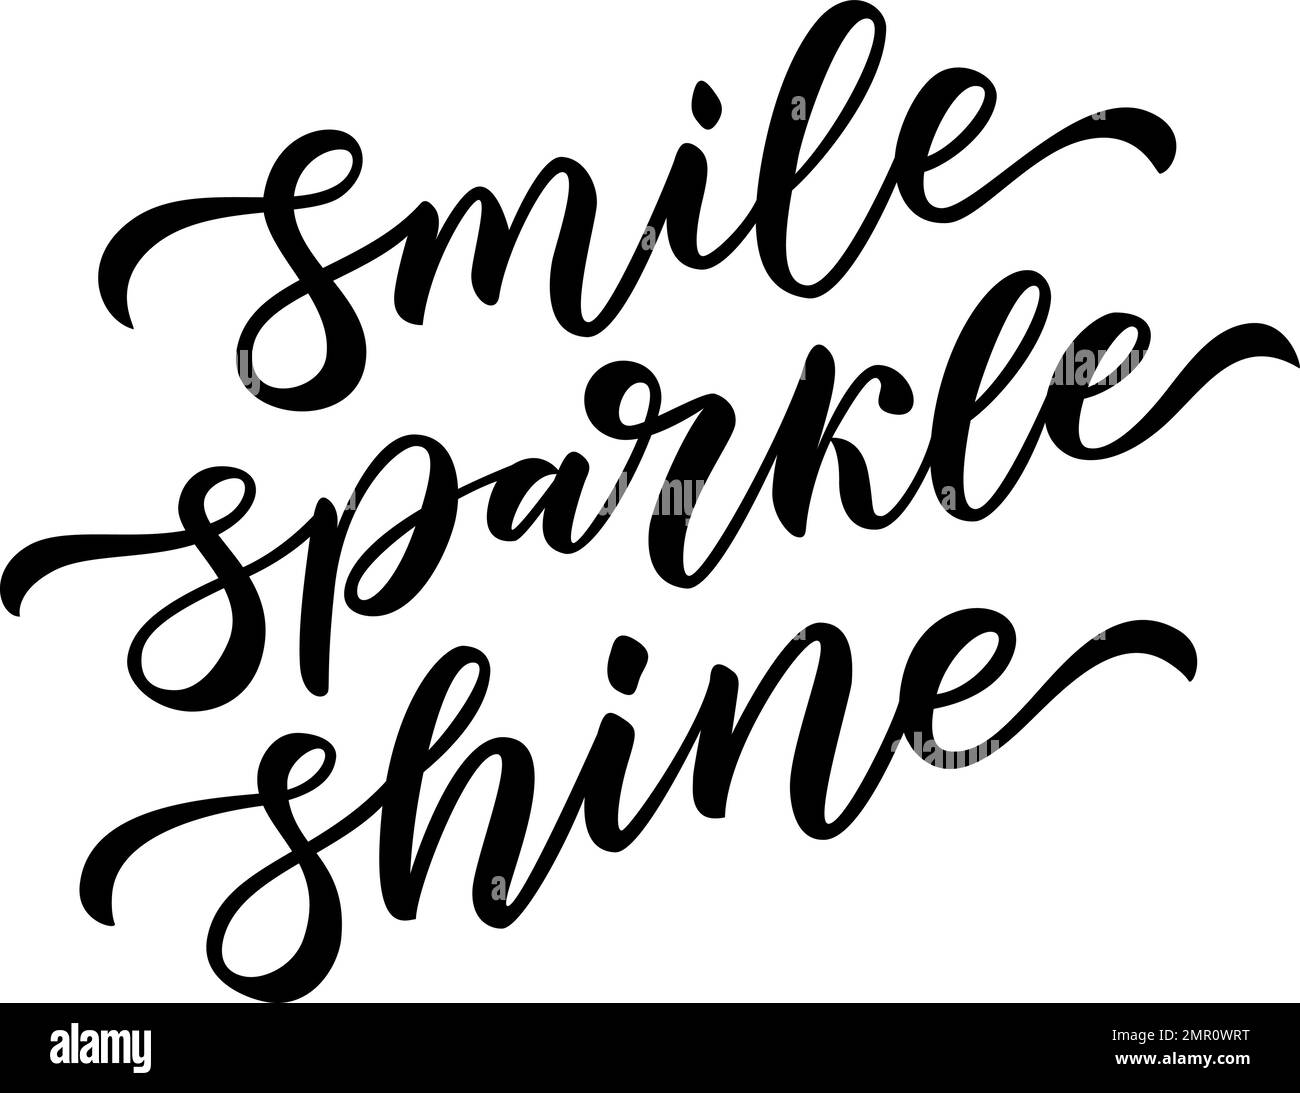 Smile quote Black and White Stock Photos & Images - Alamy